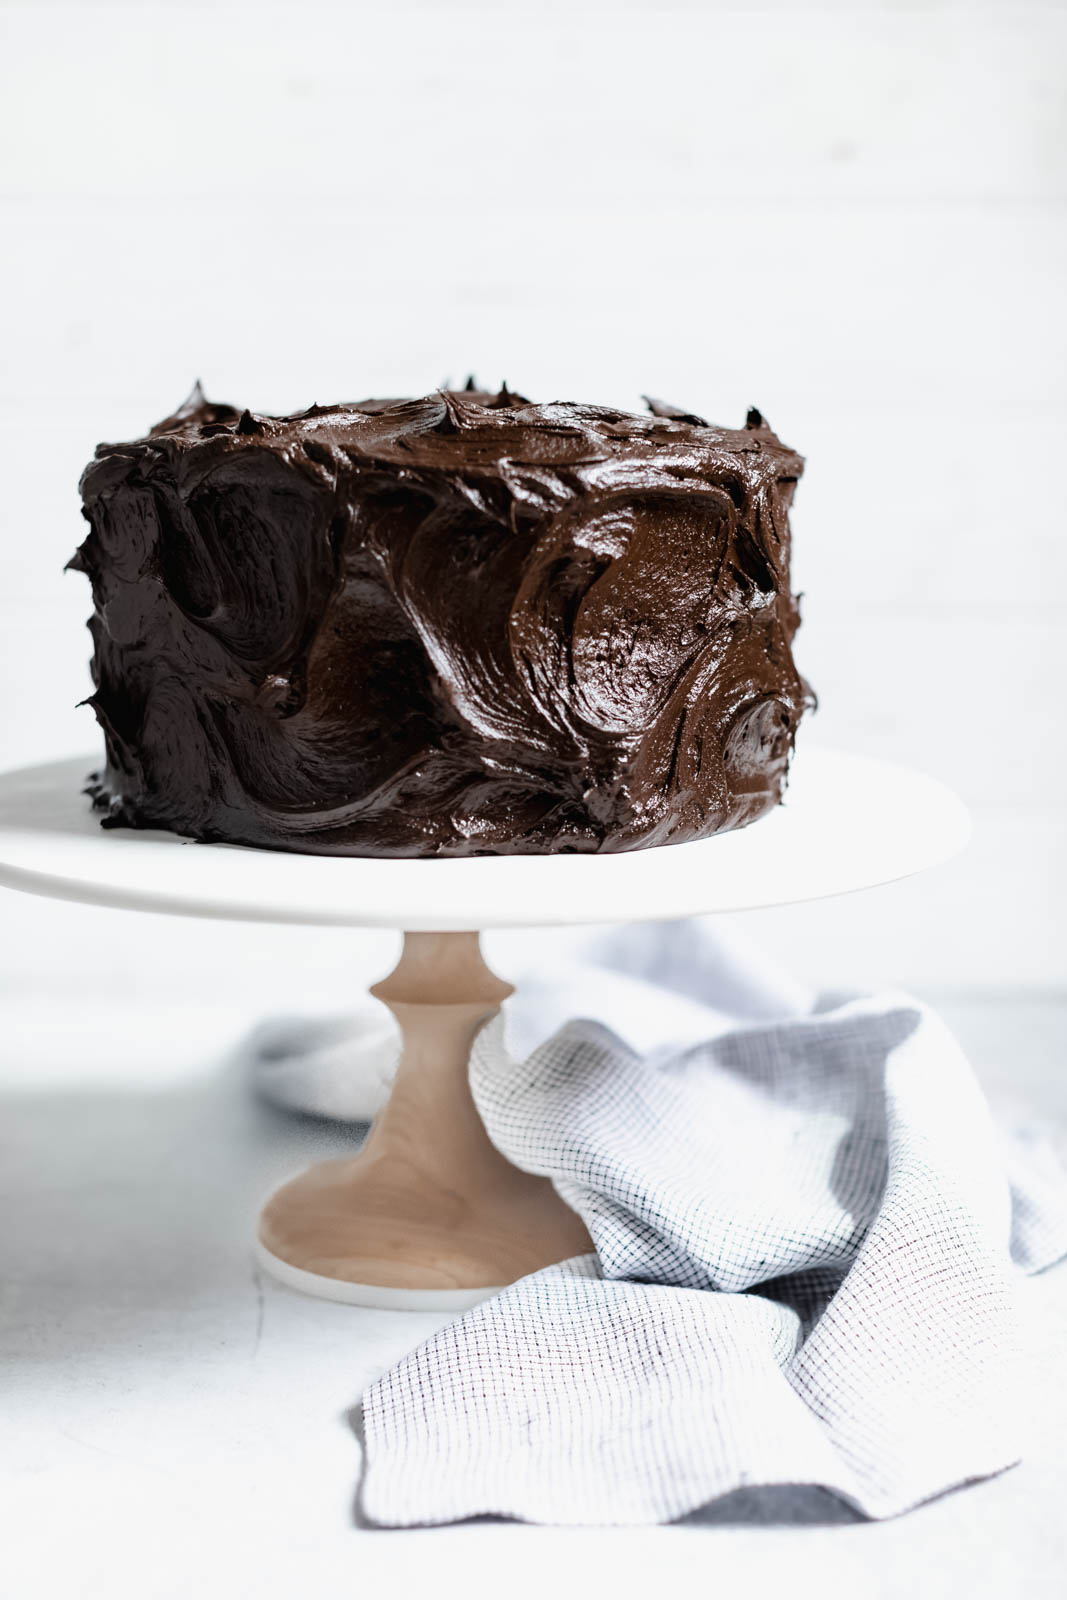 The Chocolate Blackout Cake to end all other chocolate cakes. Aka a moist as heck chocolate cake with a sinful chocolate buttercream frosting.